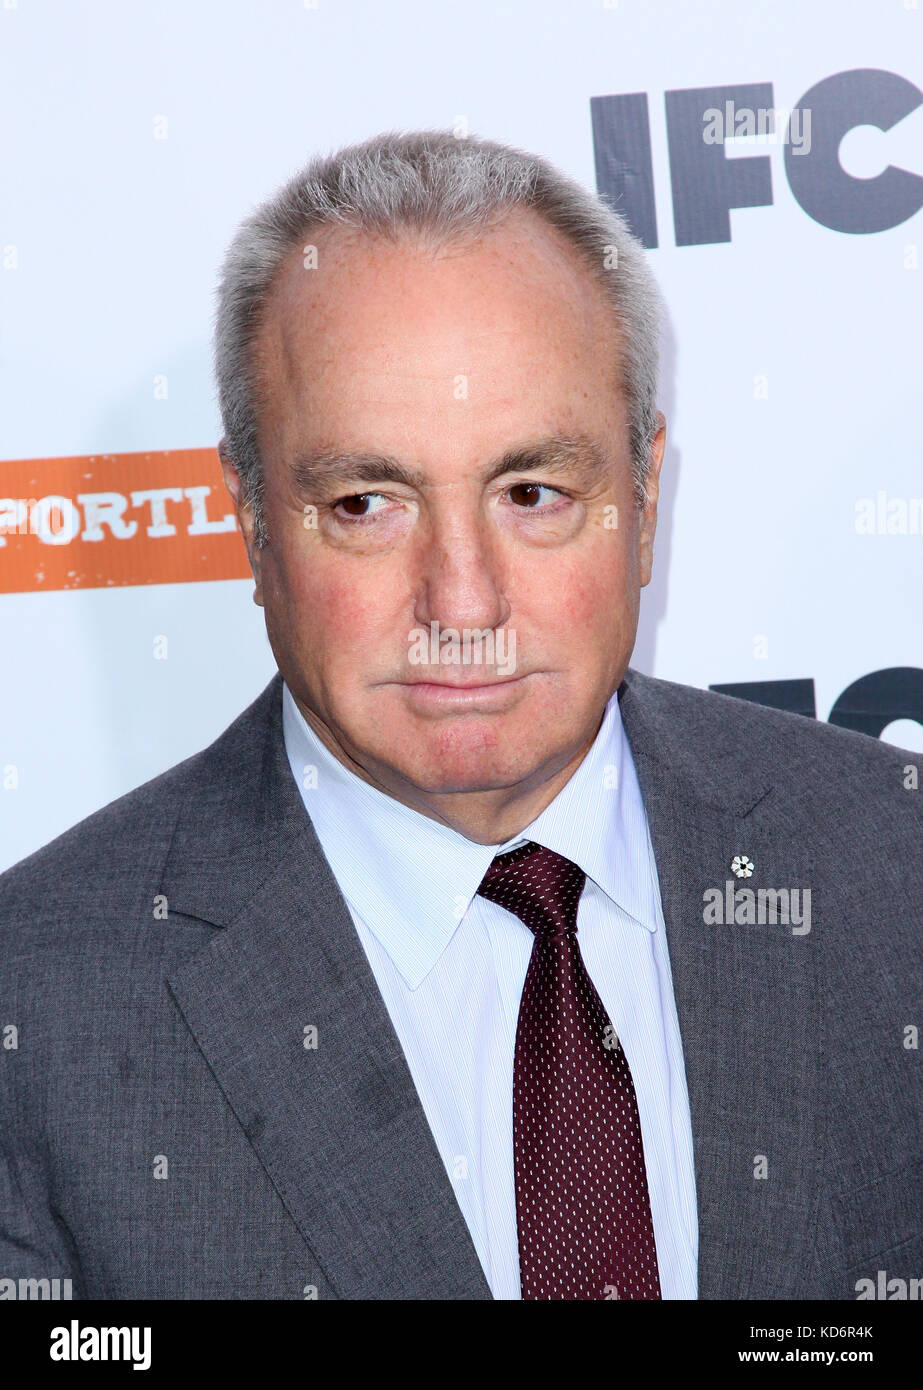 Lorne Michaels pictured at the premiere of IFCs' comedy series ' Portlandia ' at The Edison Ballroom in New York City, January 19, 2011 © Martin Roe / MediaPunch Inc Stock Photo